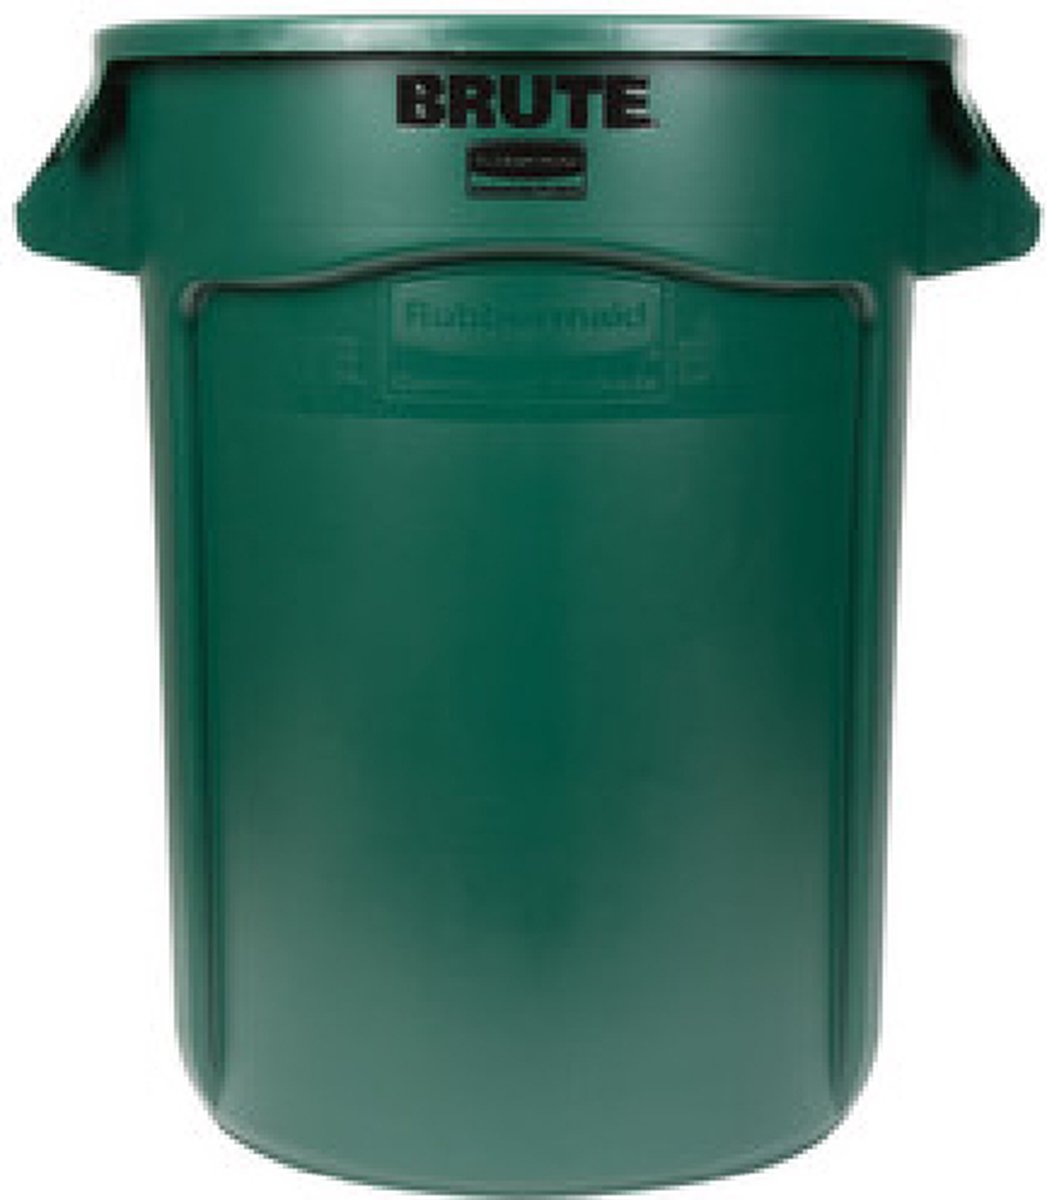 Rubbermaid Brute Container - Rond - 75,7 l - groen